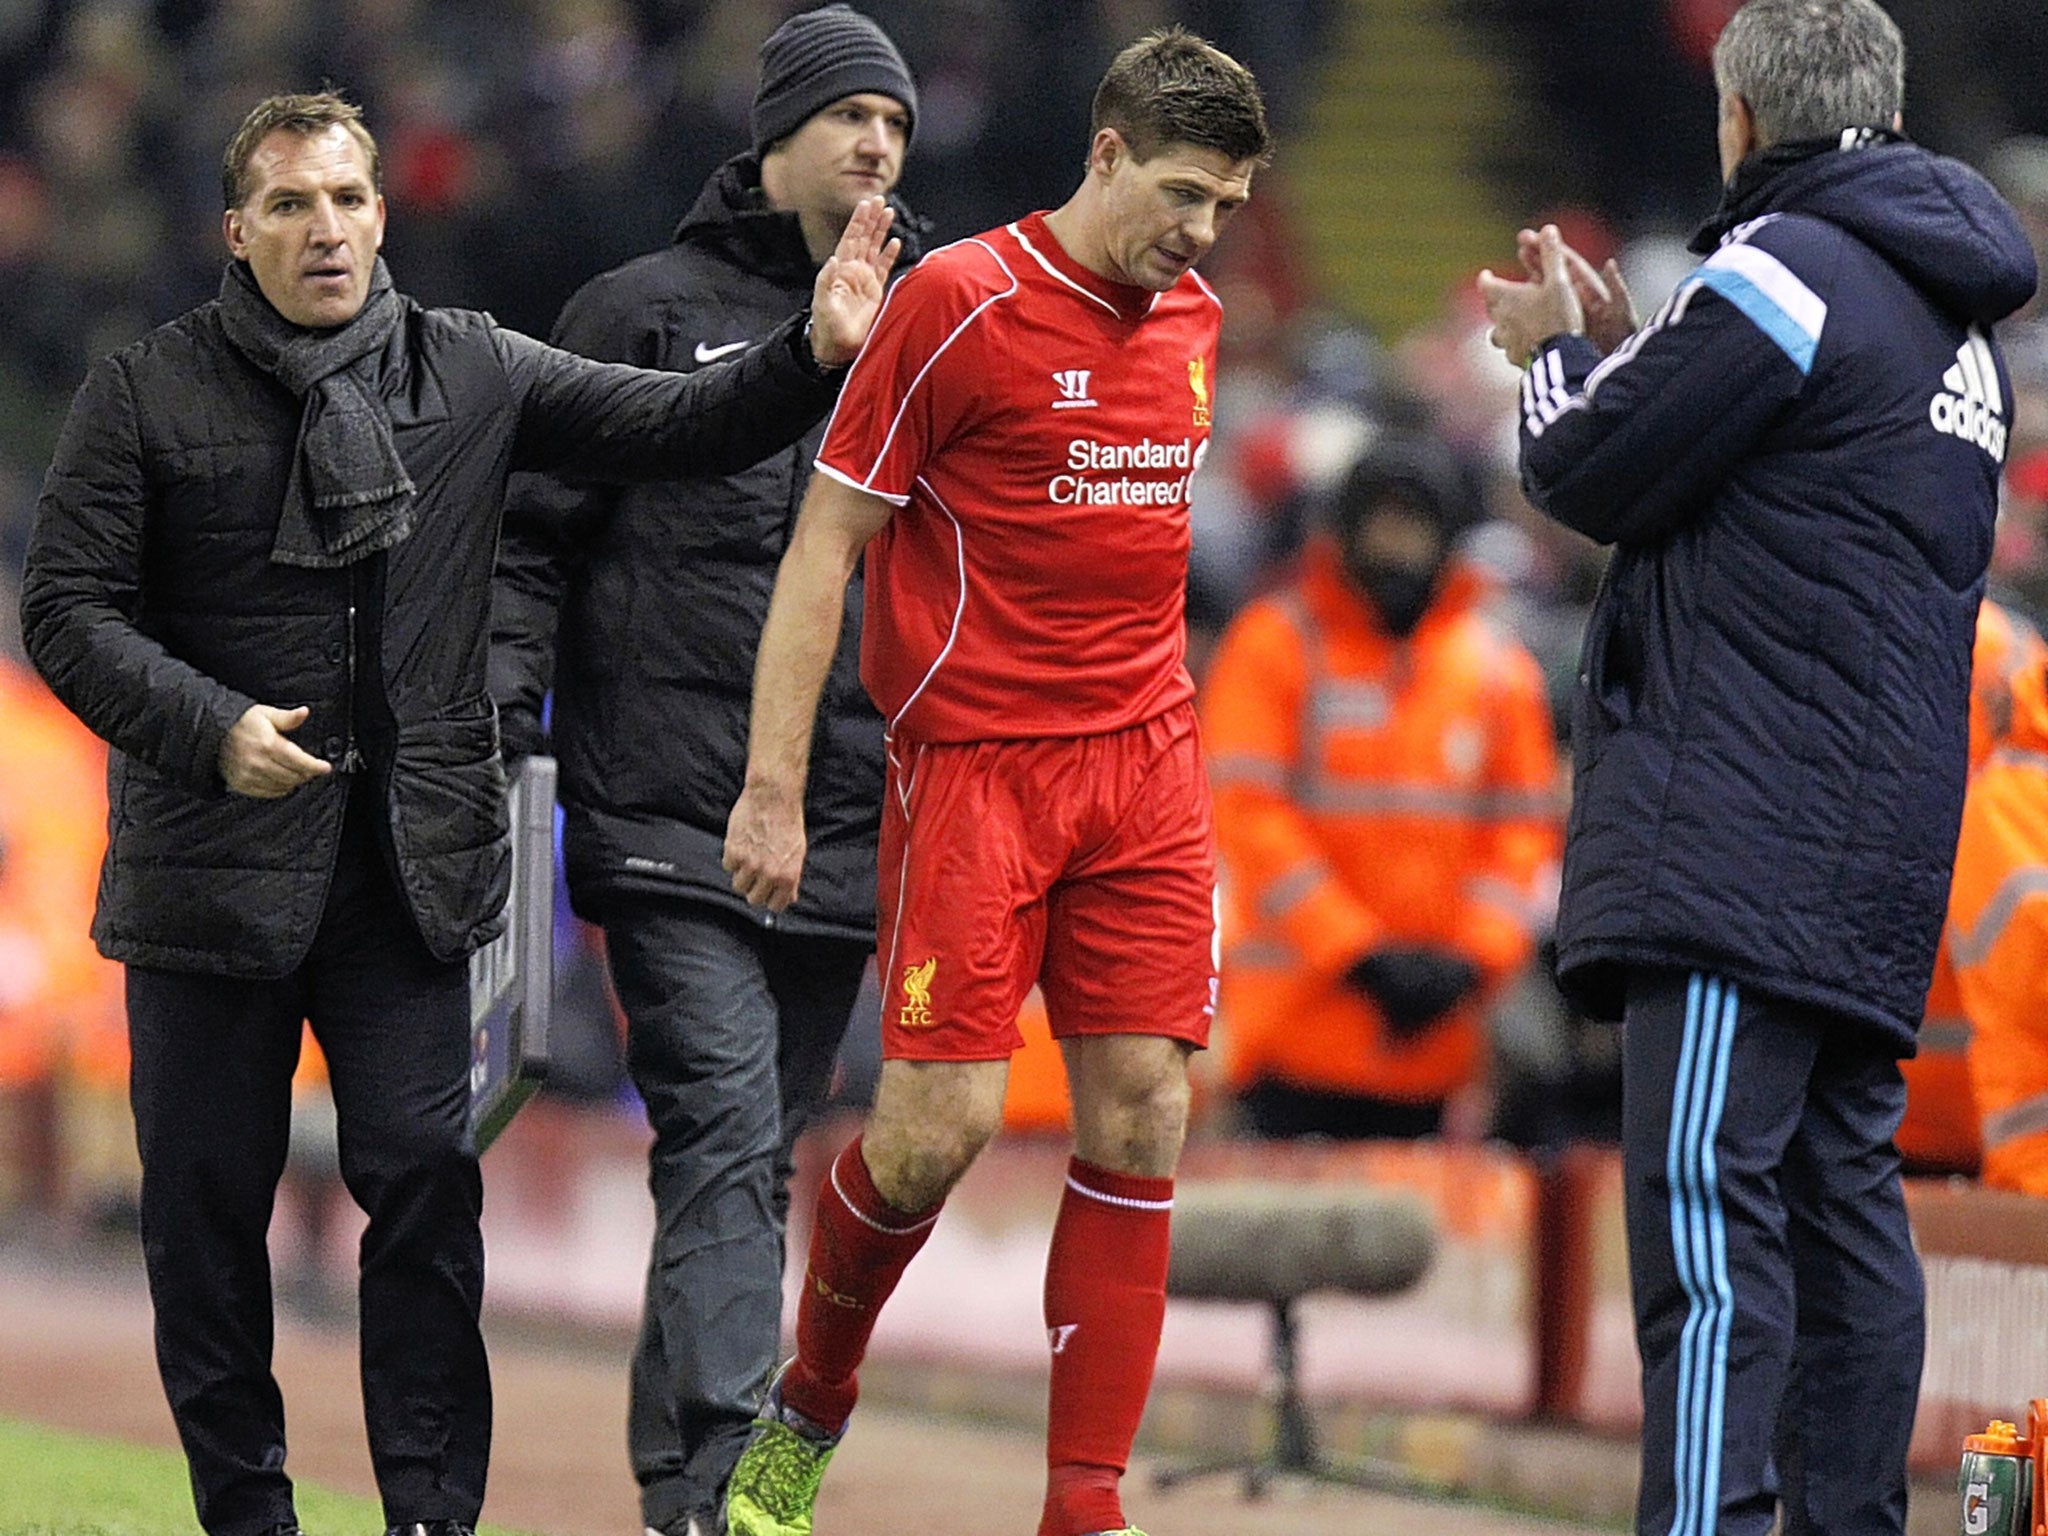 Steven Gerrard is taken off by Brendan Rodgers (right) when he could have threatened Chelsea further